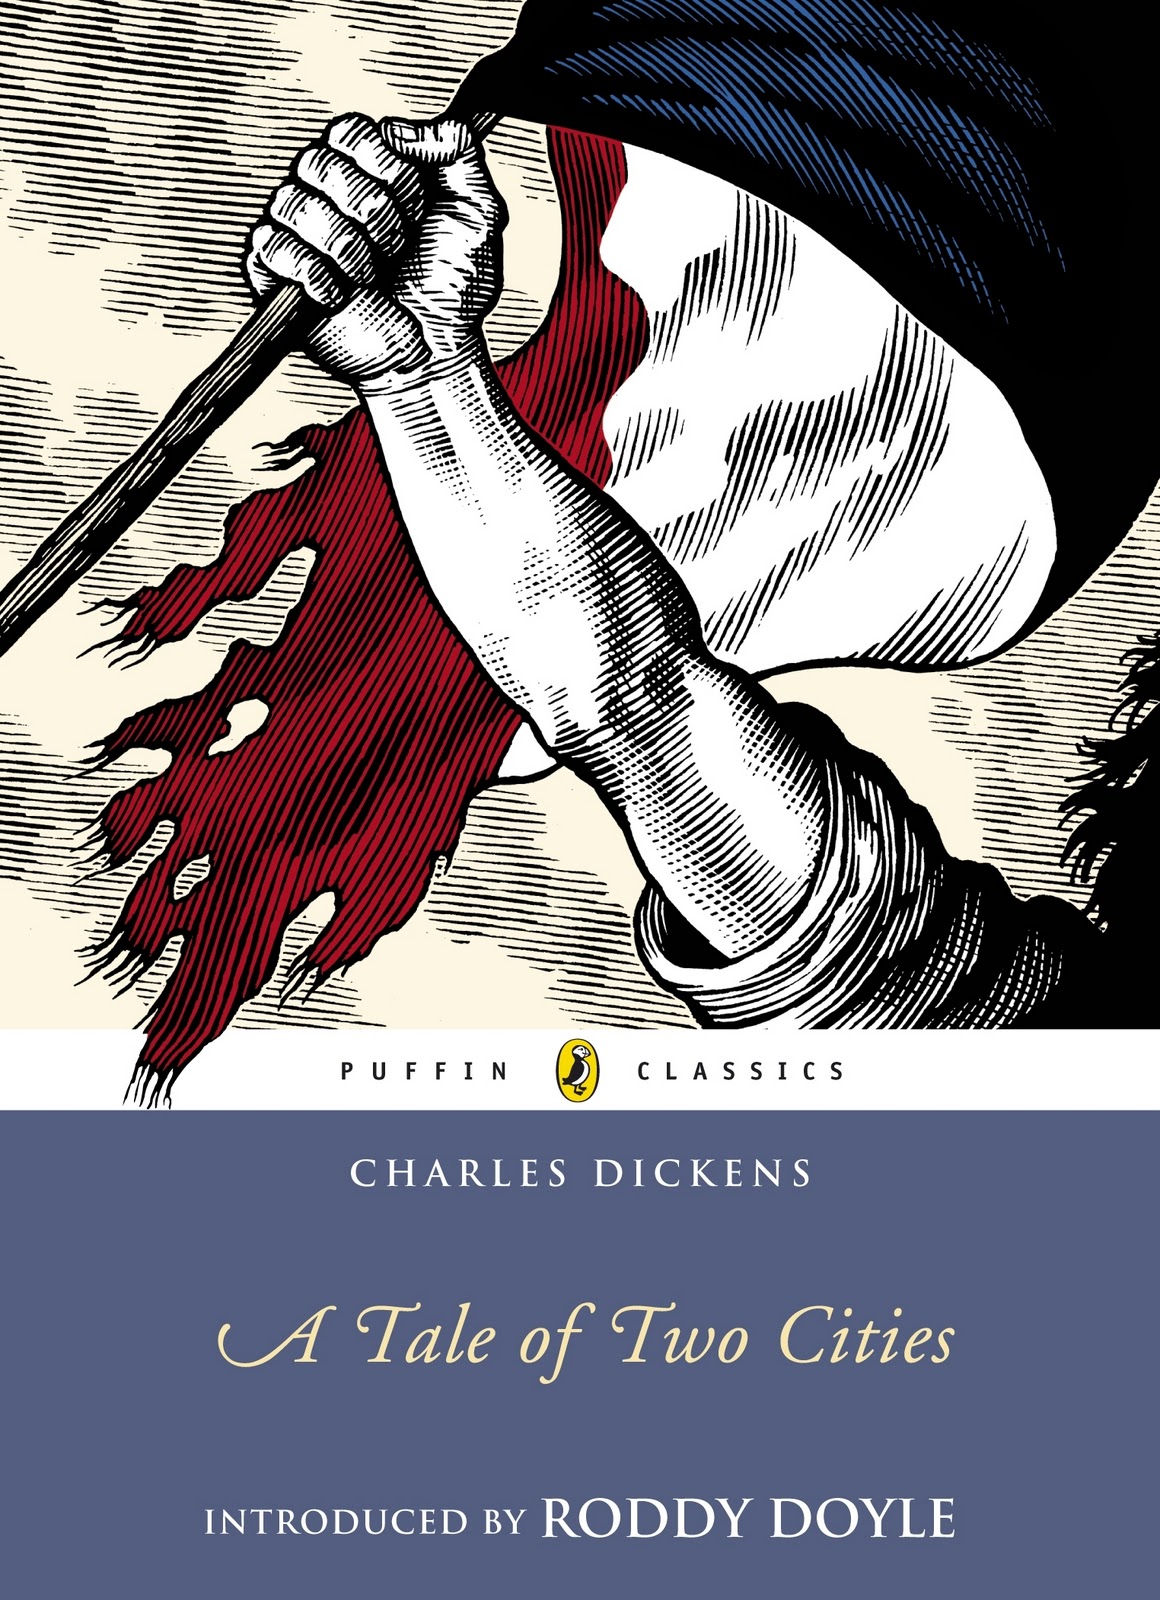 Book: A Tale of Two Cities